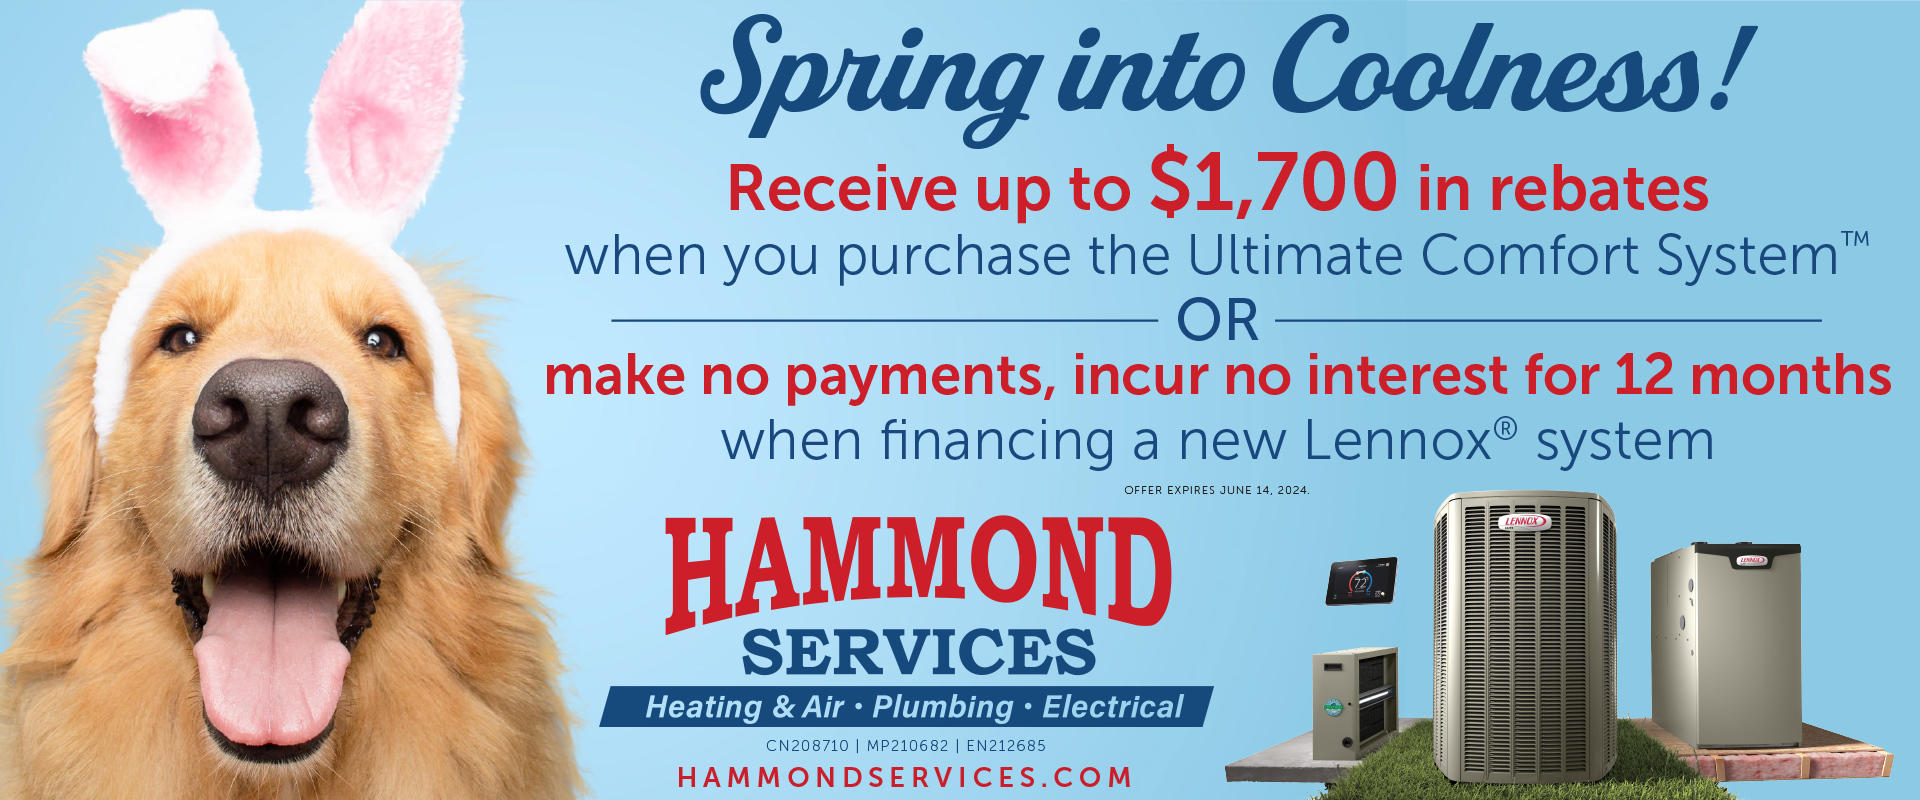 Hammond Furnace Special - Call for details.